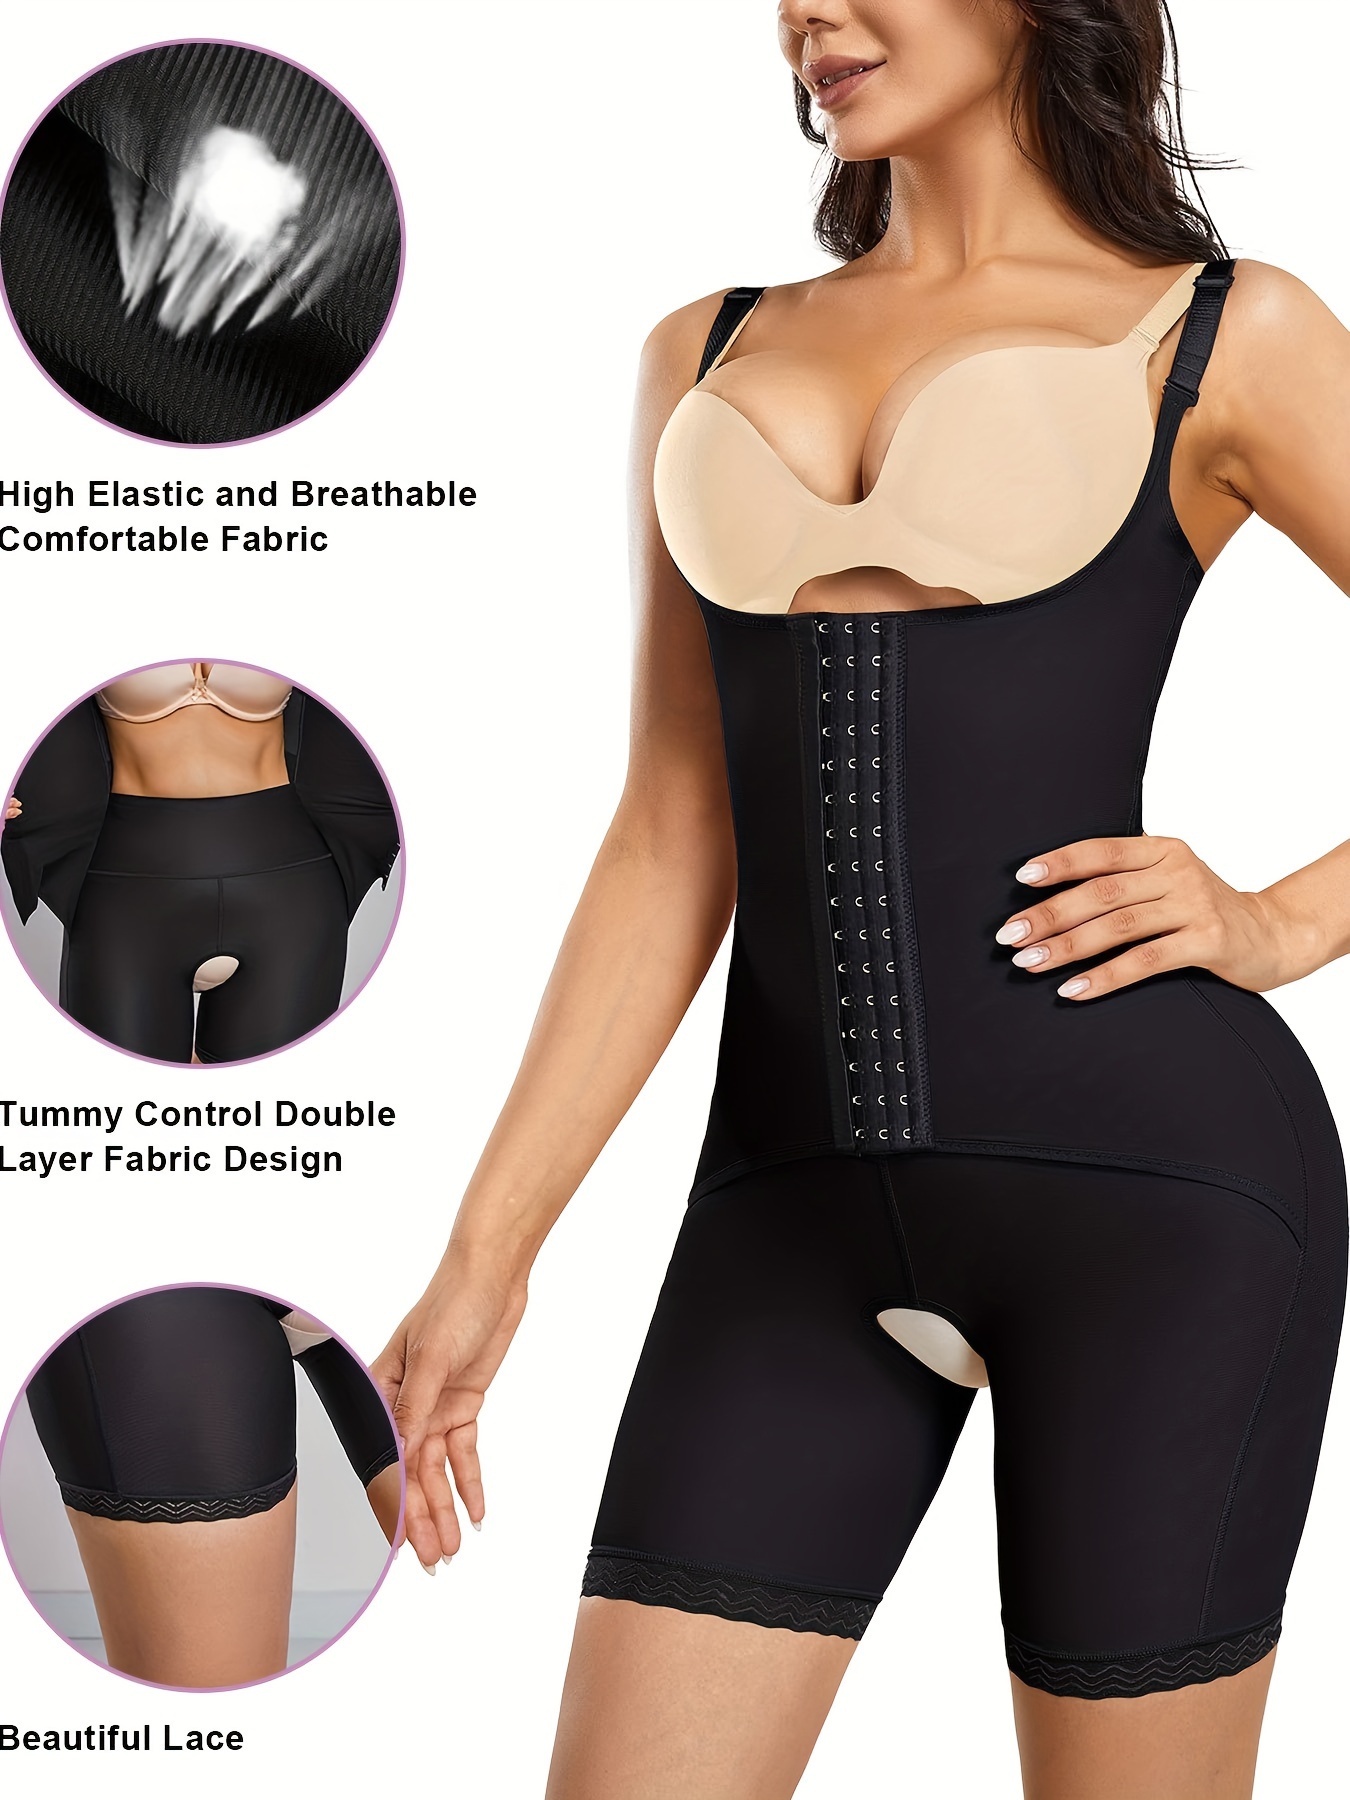 Summer Body Shaper For Women High Elastic Bodysuit Bottoms With Tummy  Control, Thin Waist Trainer Plus Size Corset Shapewear, Fashionable  Shapewear In From Hao_shops, $12.04